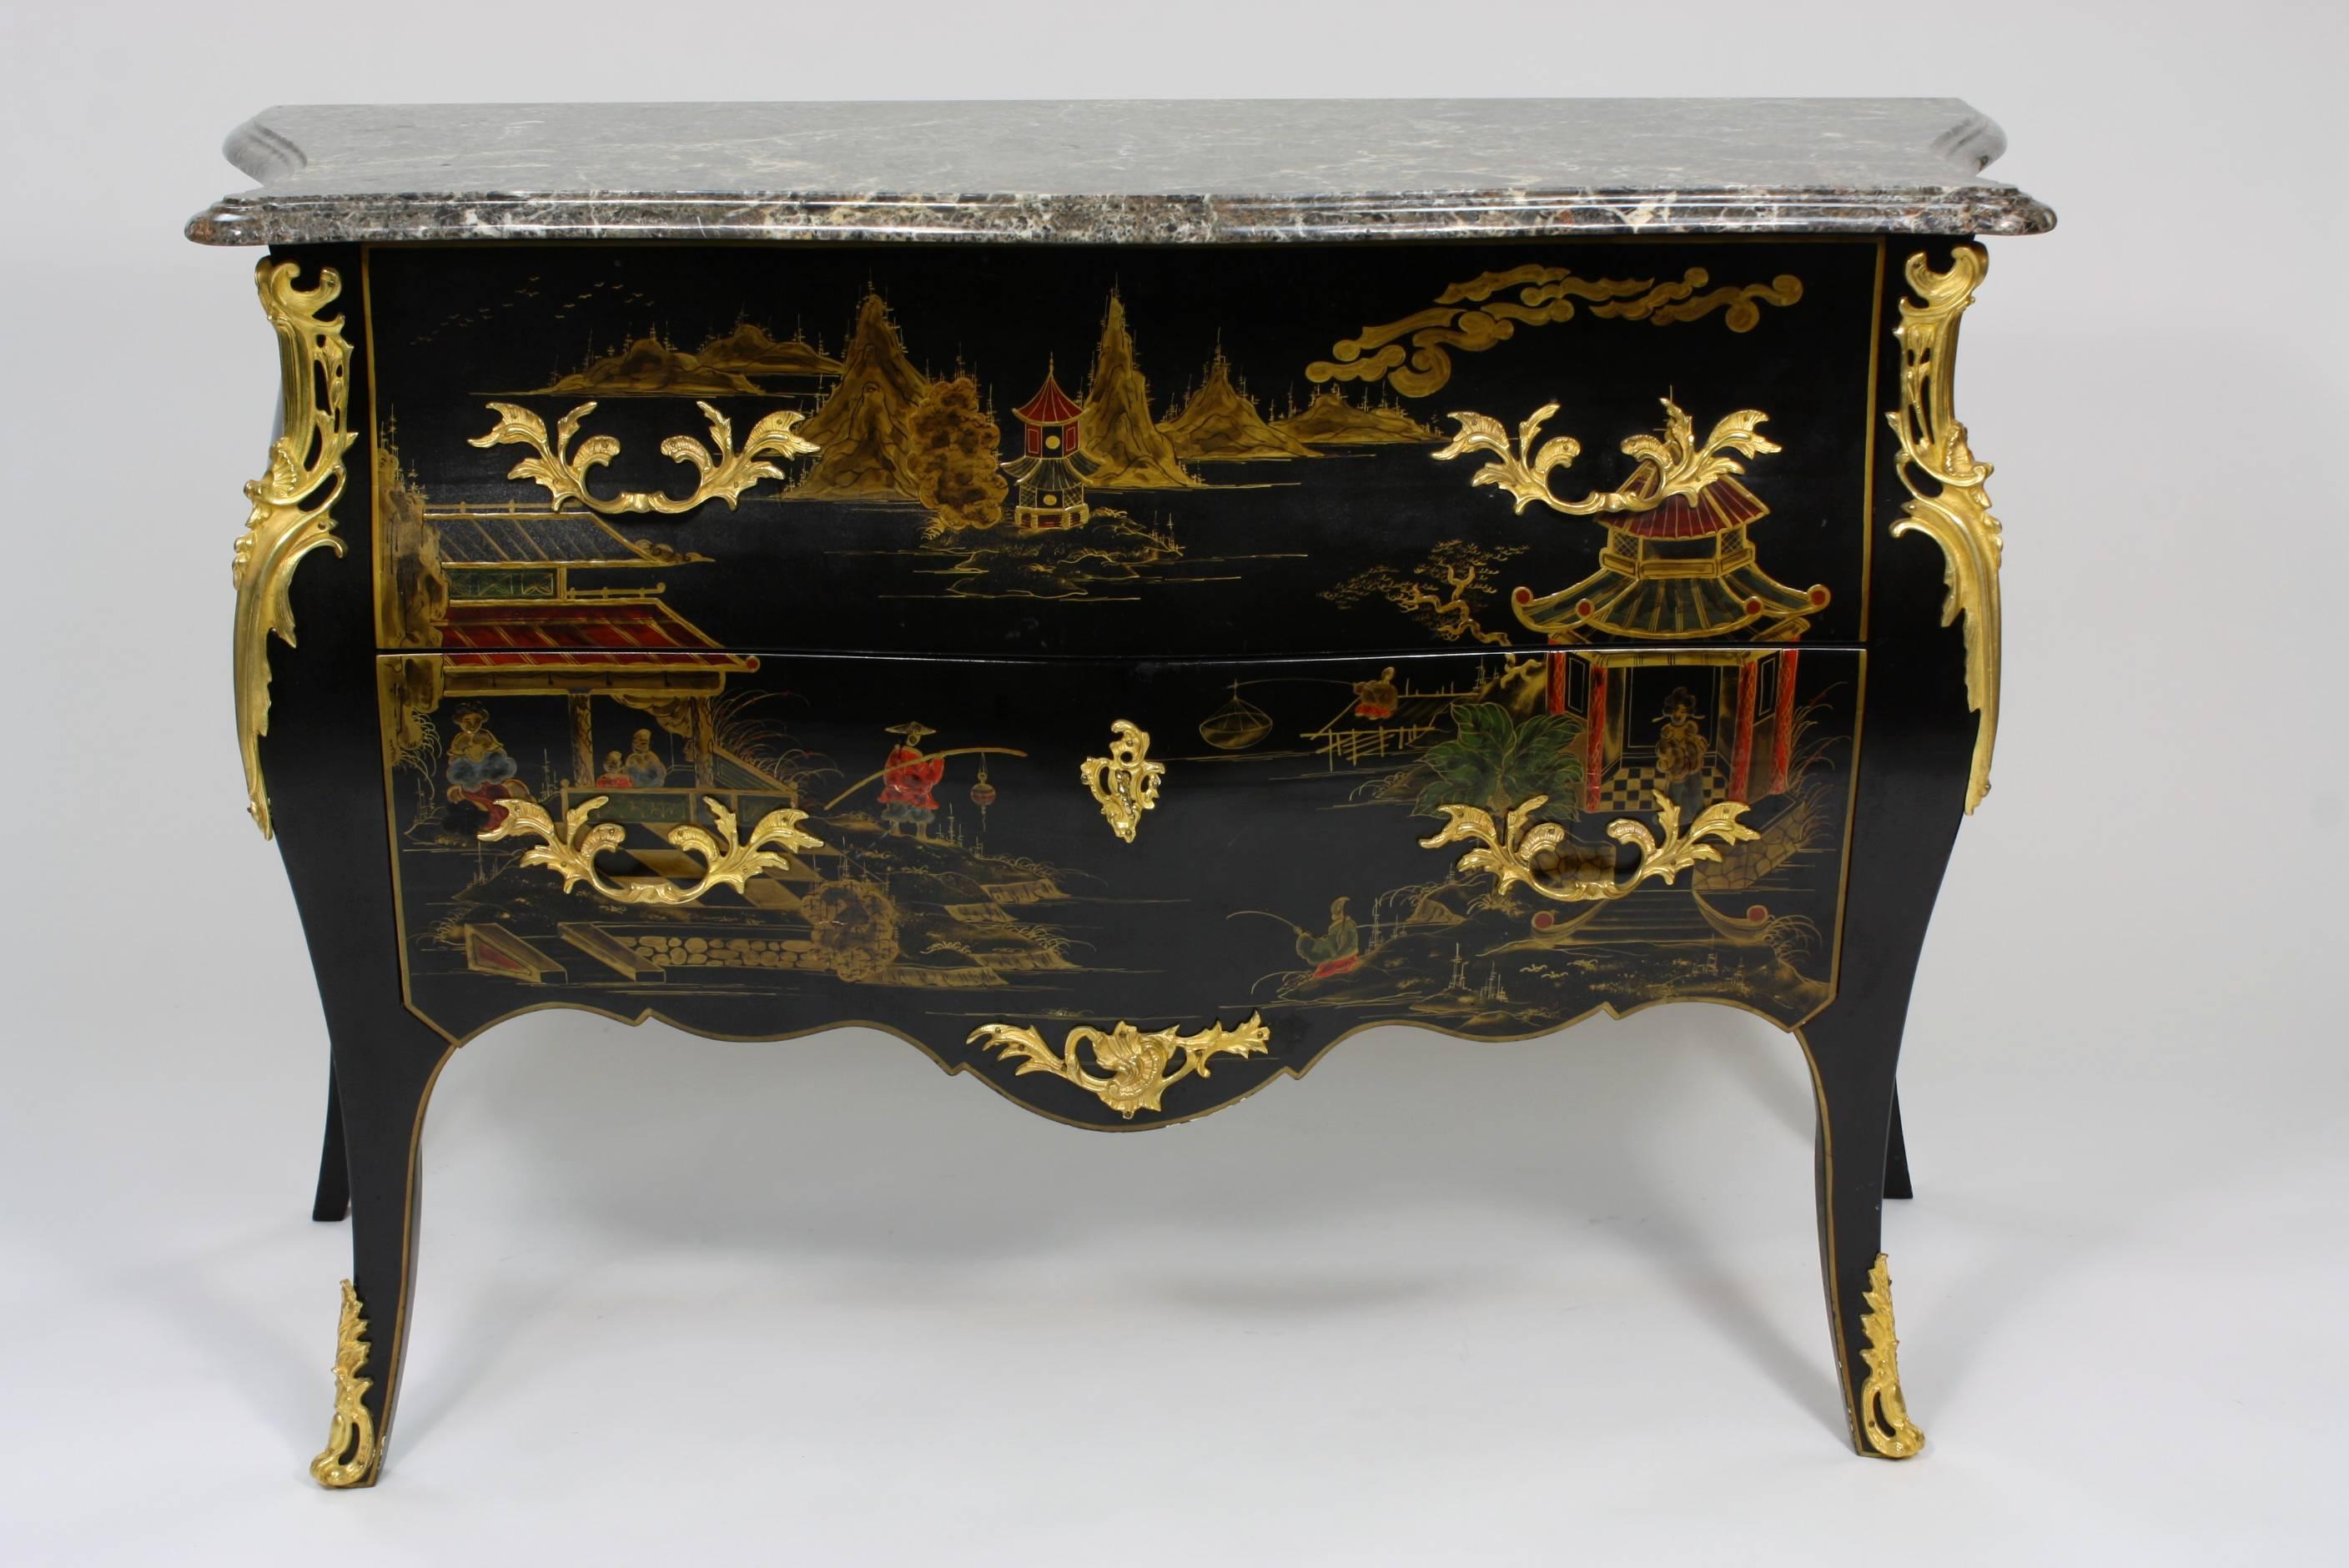 A highly-decorative and very good quality French commode, in the Louis XV style with lacquered Chinoiserie designs, well-cast gilt-bronze mounts, two drawers with working lock and key, and variegated grey and white marble top.  